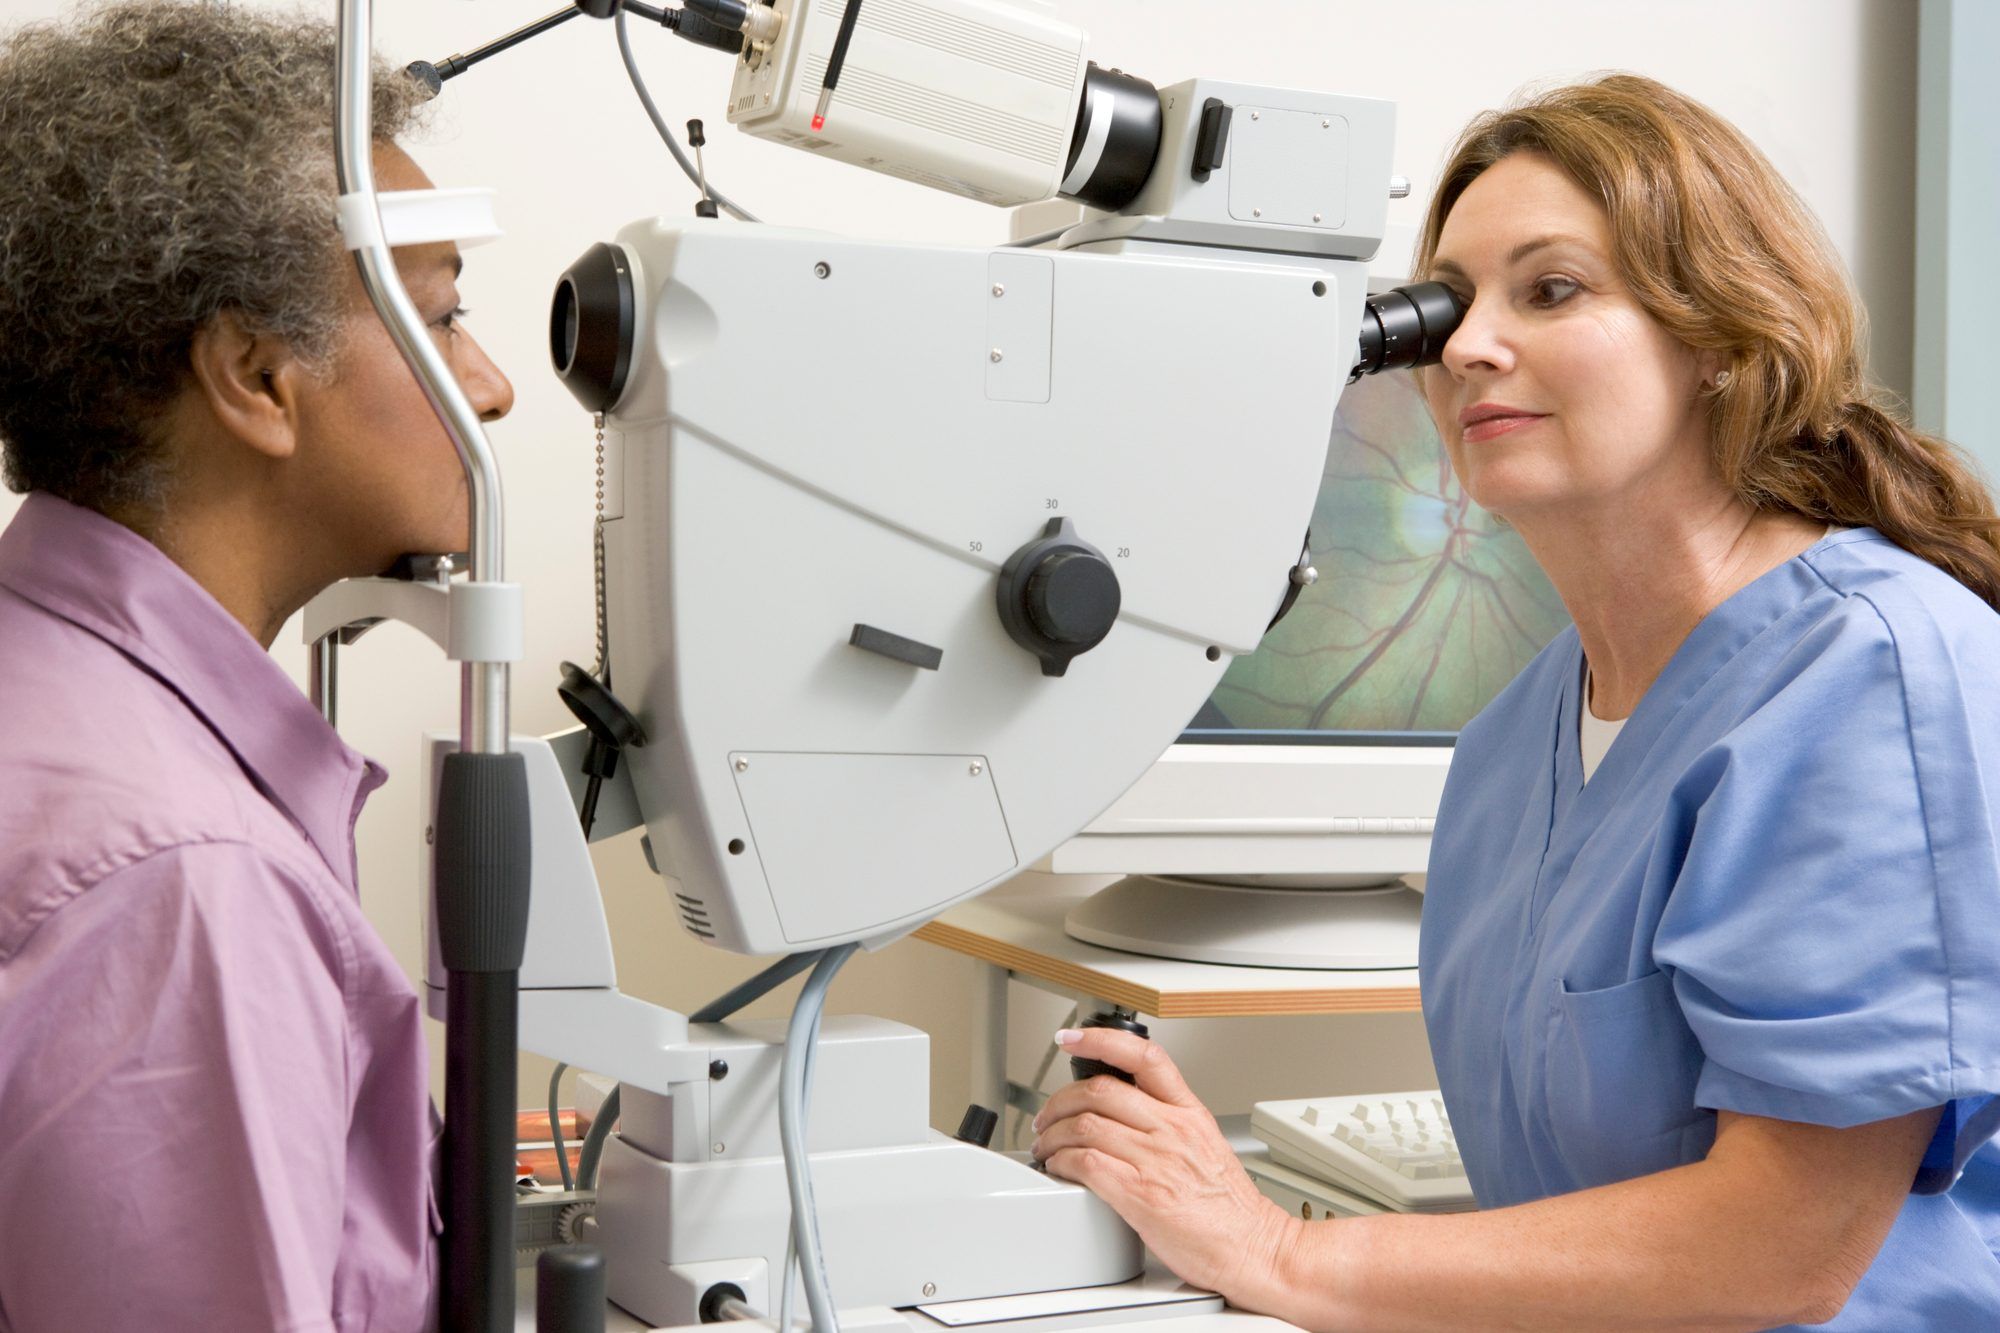 Female doctor provides eye exam to female patient